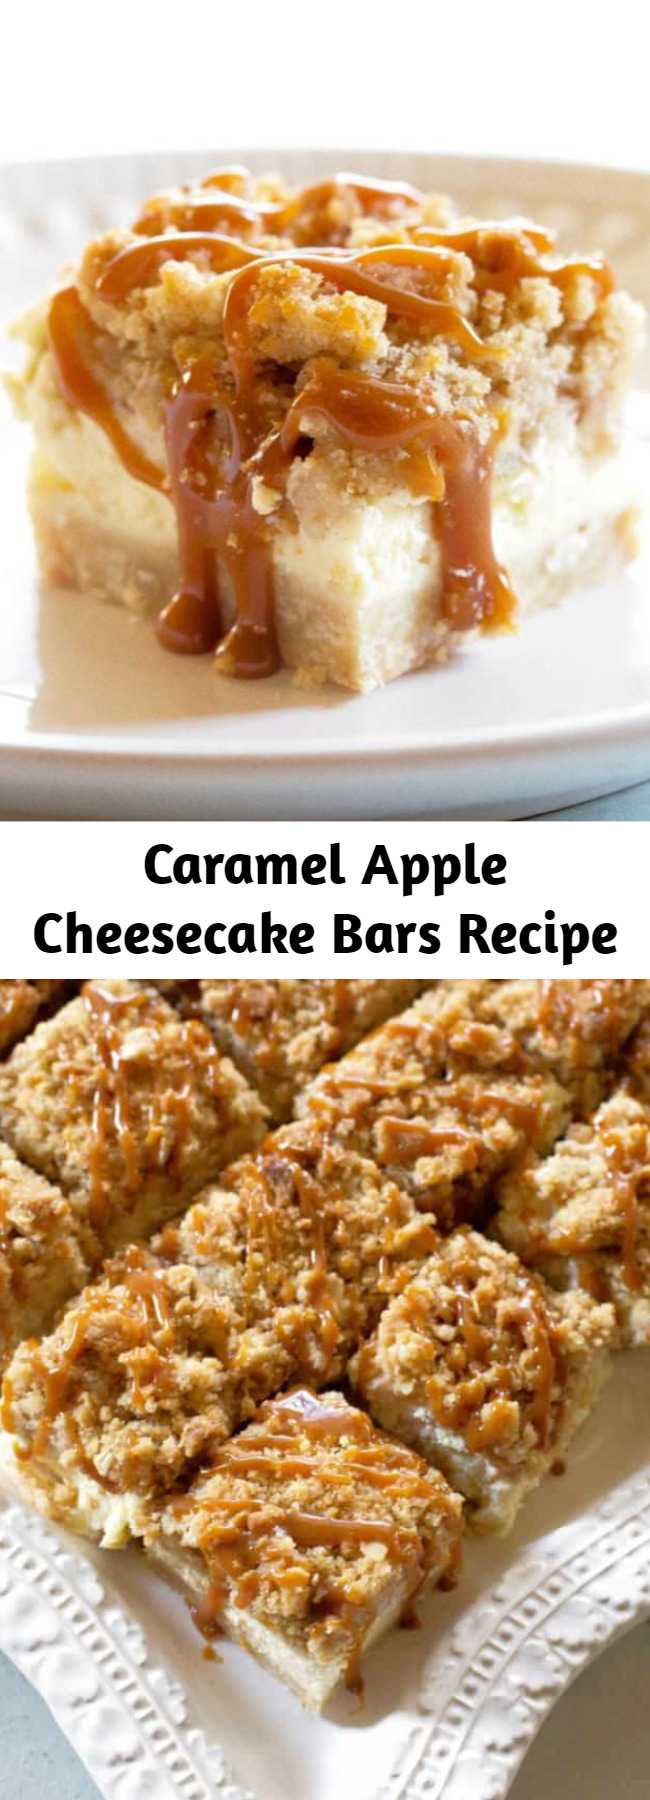 Caramel Apple Cheesecake Bars Recipe - These creamy Caramel Apple Cheesecake Bars start with a shortbread crust, a thick cheesecake layer, and are topped with diced cinnamon apples and a sweet streusel topping. These are a tried and true cheesecake bar dessert recipe.